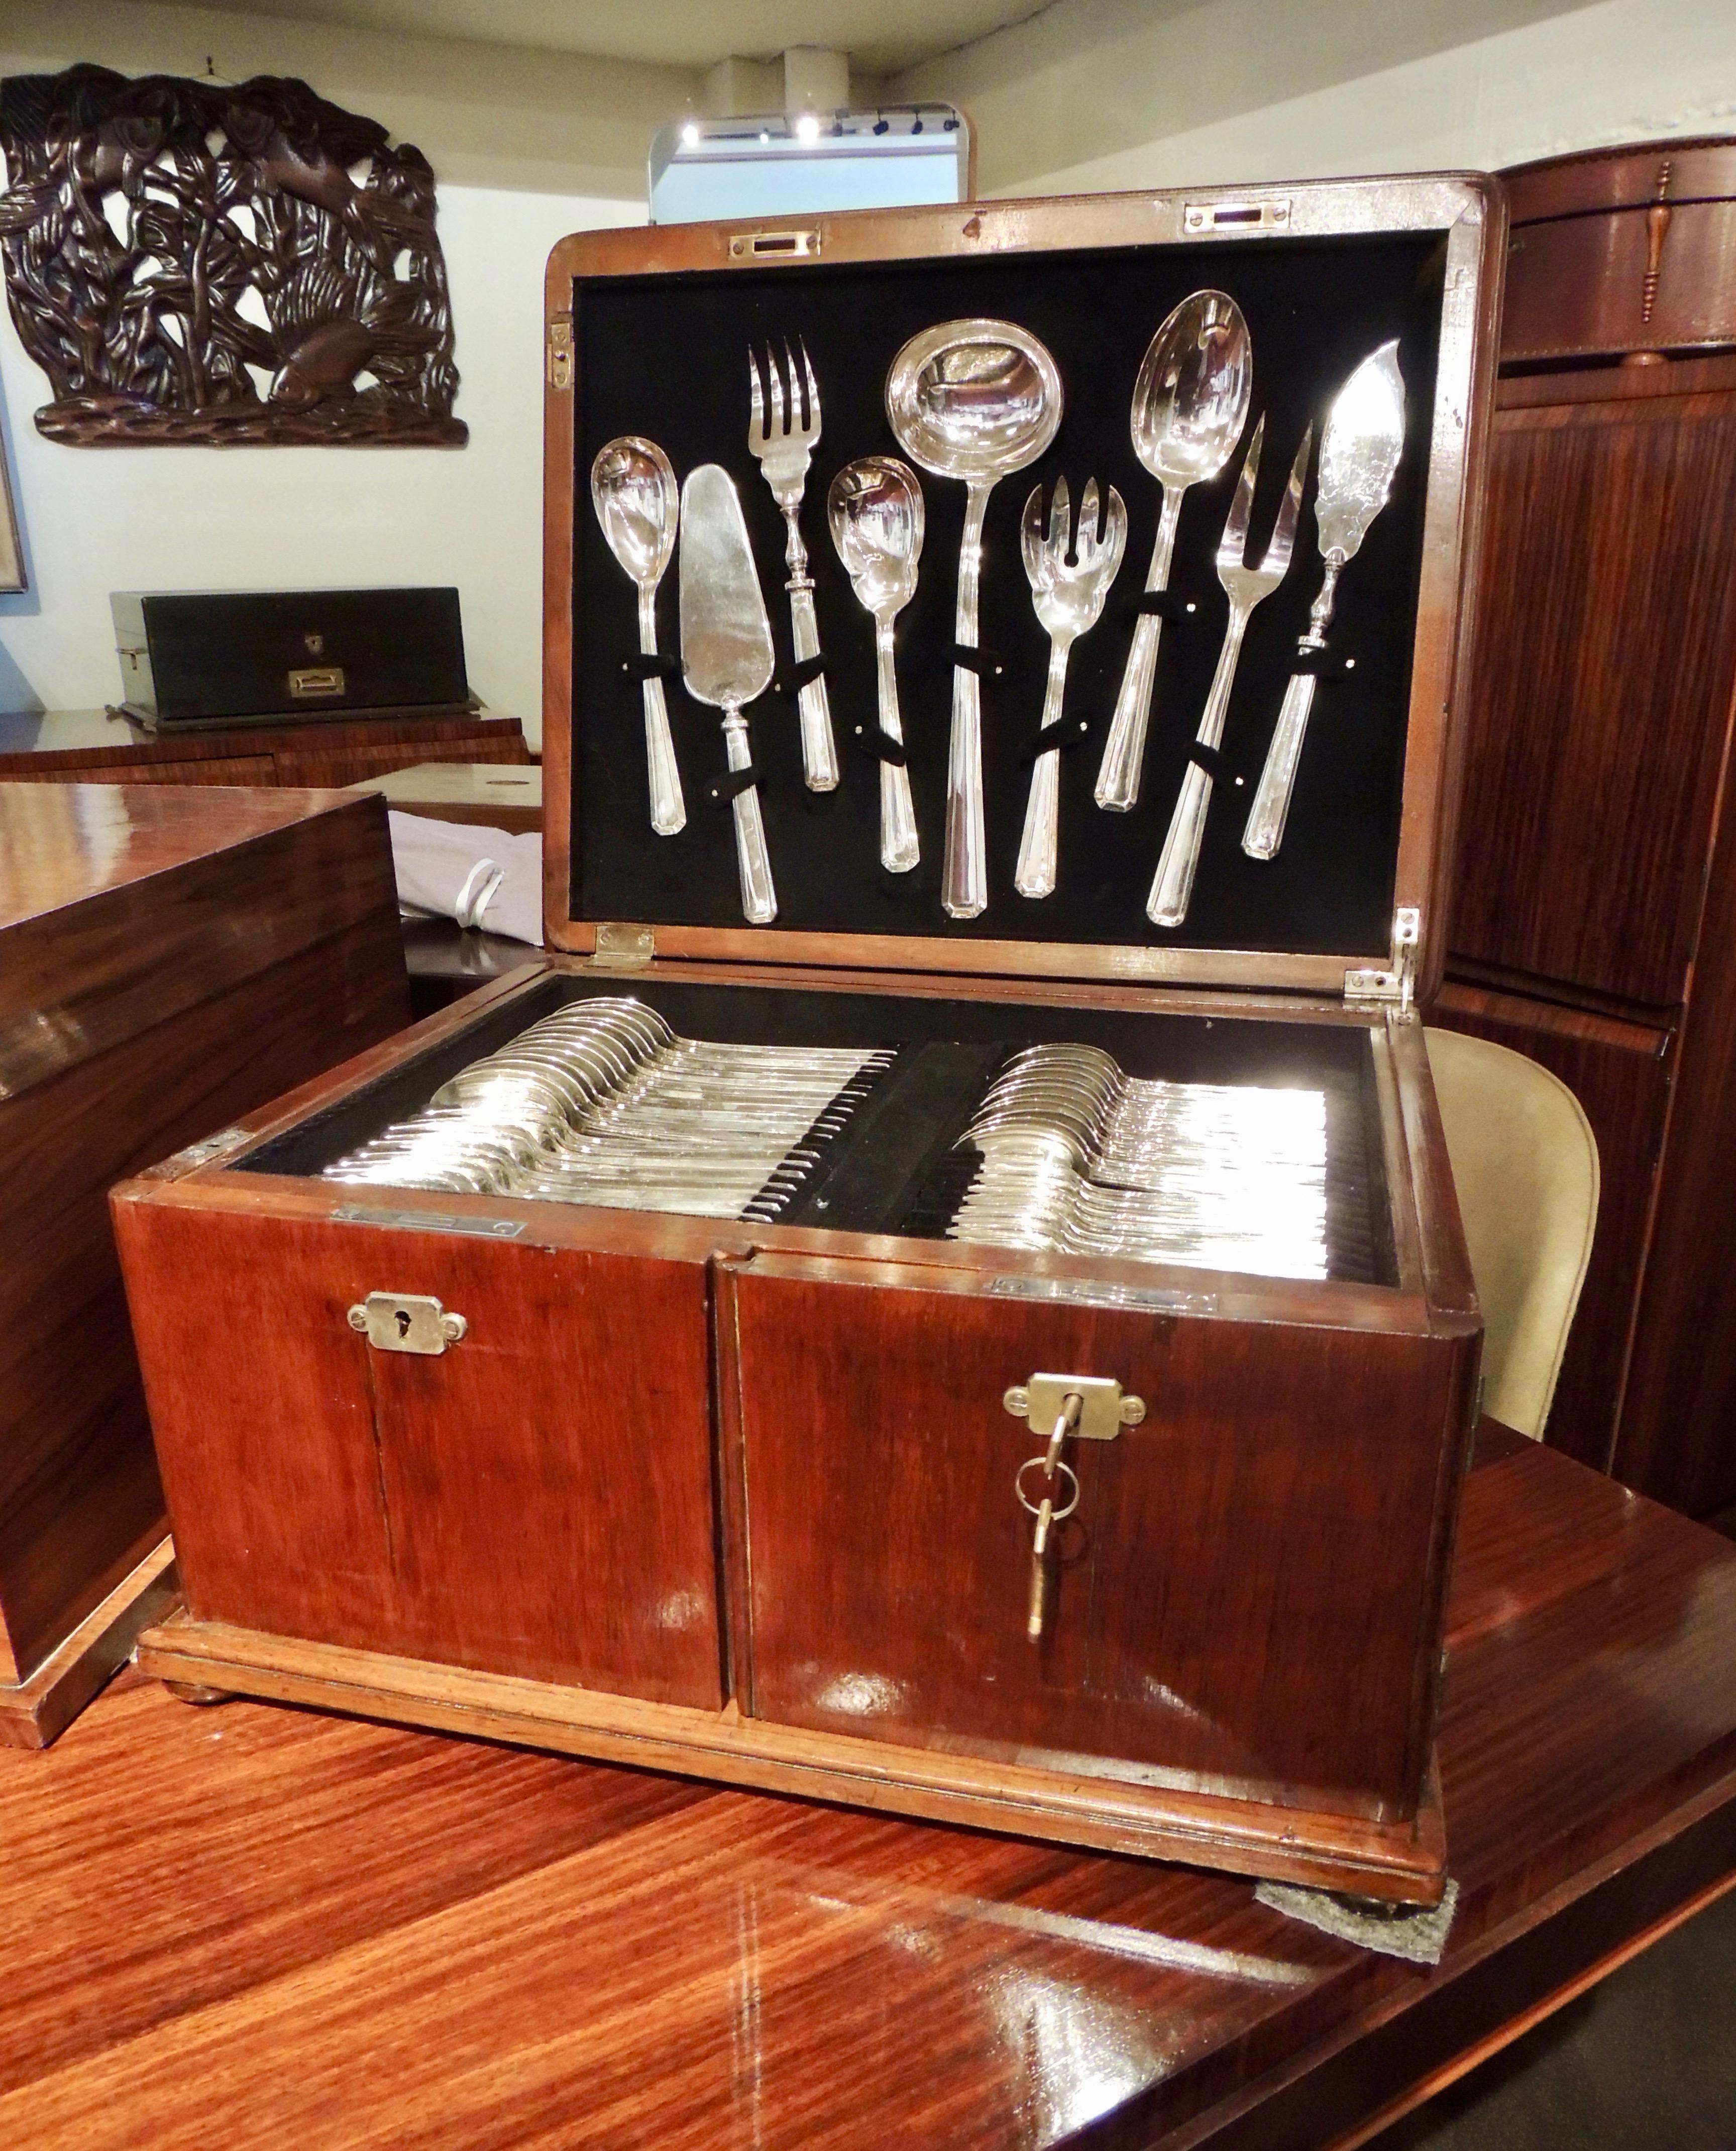 Complete twelve-piece silver service for twelve in beautiful condition from Calderoni Fratelli of Milan Italy. The set contains a total of 153 pieces and all of it housed in a custom wooden chest with felt-covered fittings to hold each piece in